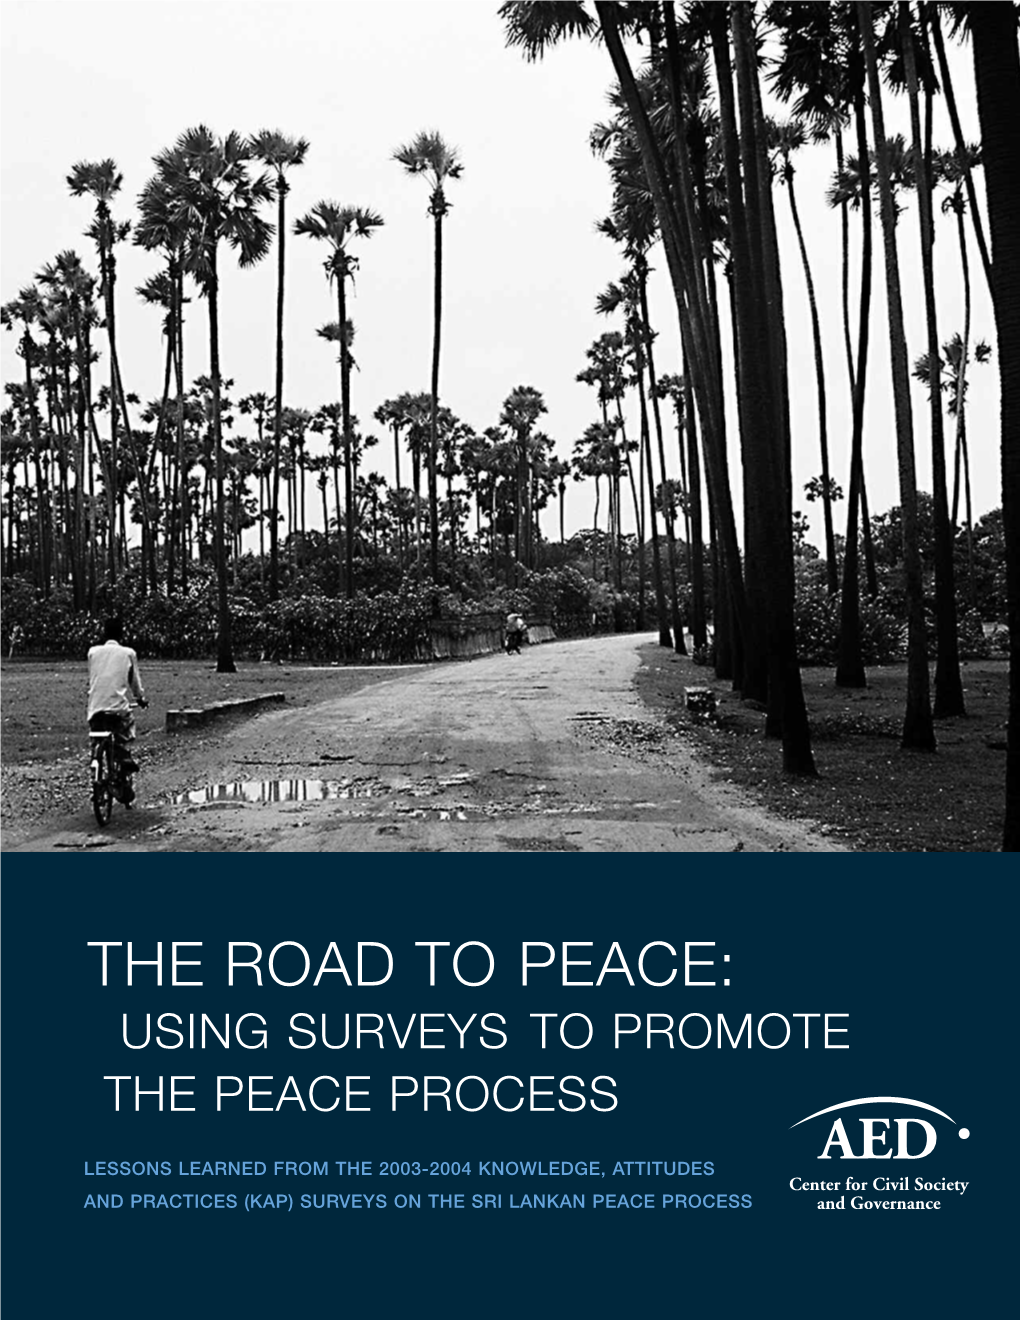 The Road to Peace: Using Surveys to Promote the Peace Process